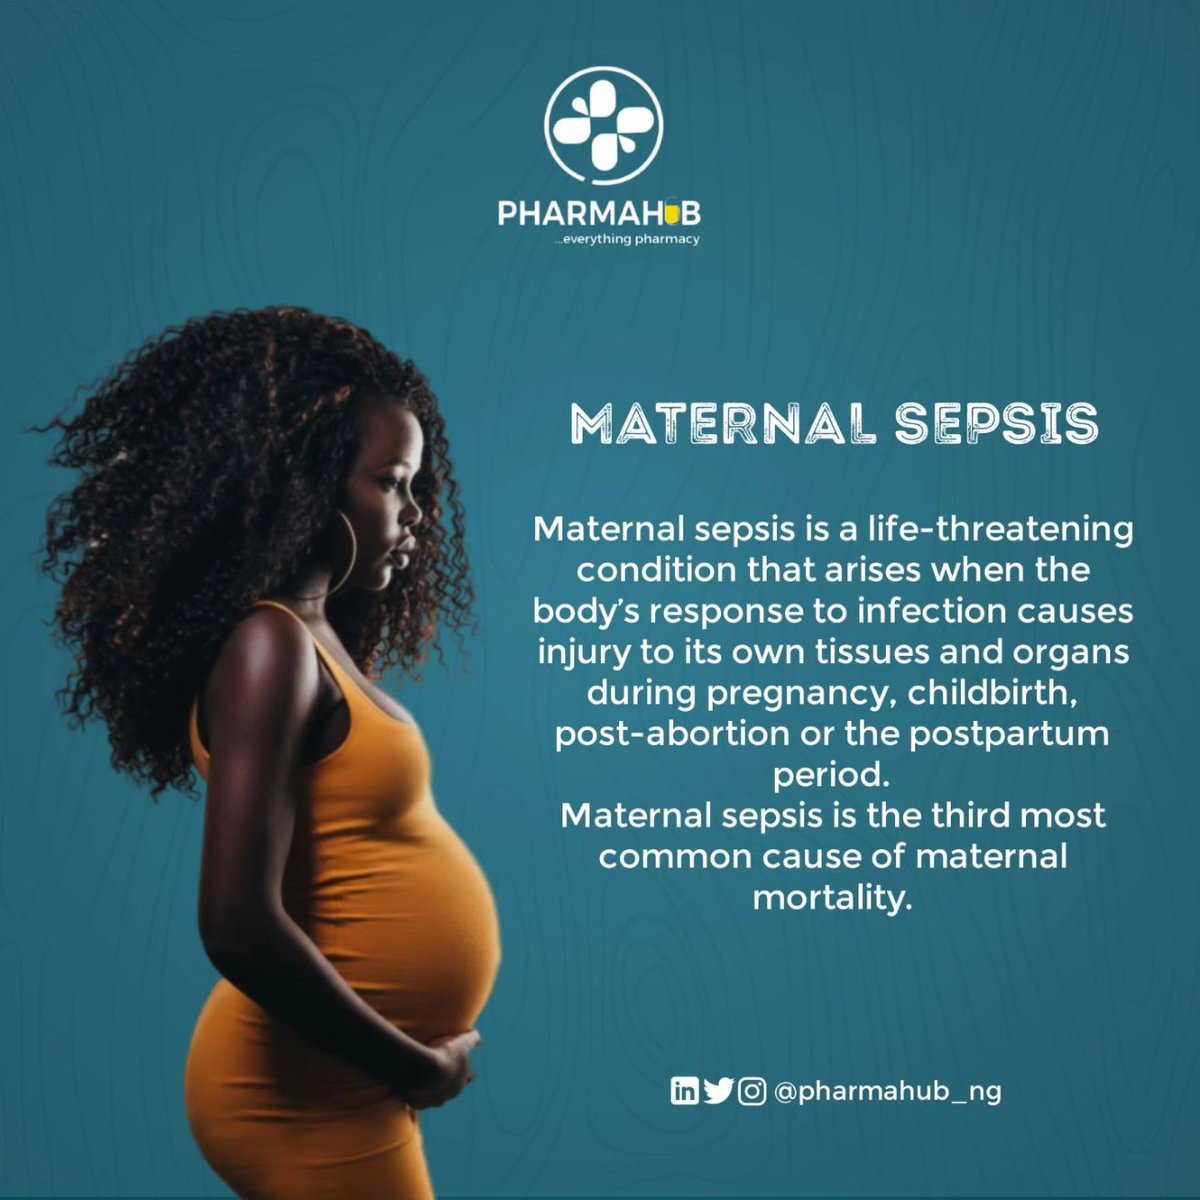 Maternal sepsis is a life-threatening condition that arises when the body's response to infection causes injury to its own tissues and organs during pregnancy, childbirth, post-abortion, or the postpartum period. instagram.com/p/C671kcvryB8/… ©️PharmahubNG